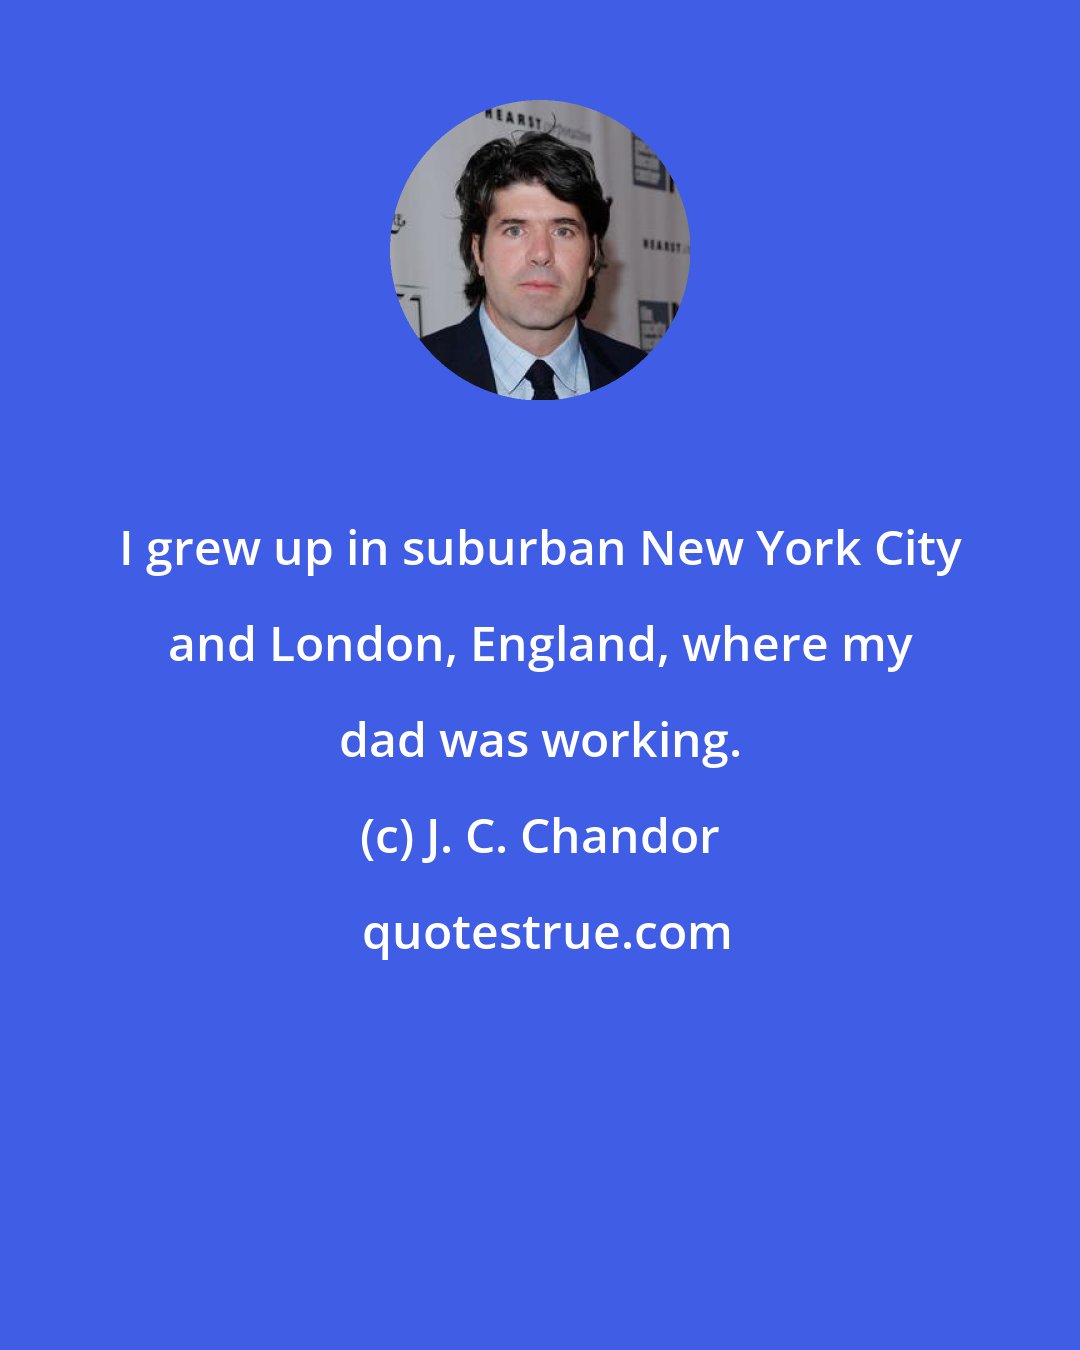 J. C. Chandor: I grew up in suburban New York City and London, England, where my dad was working.